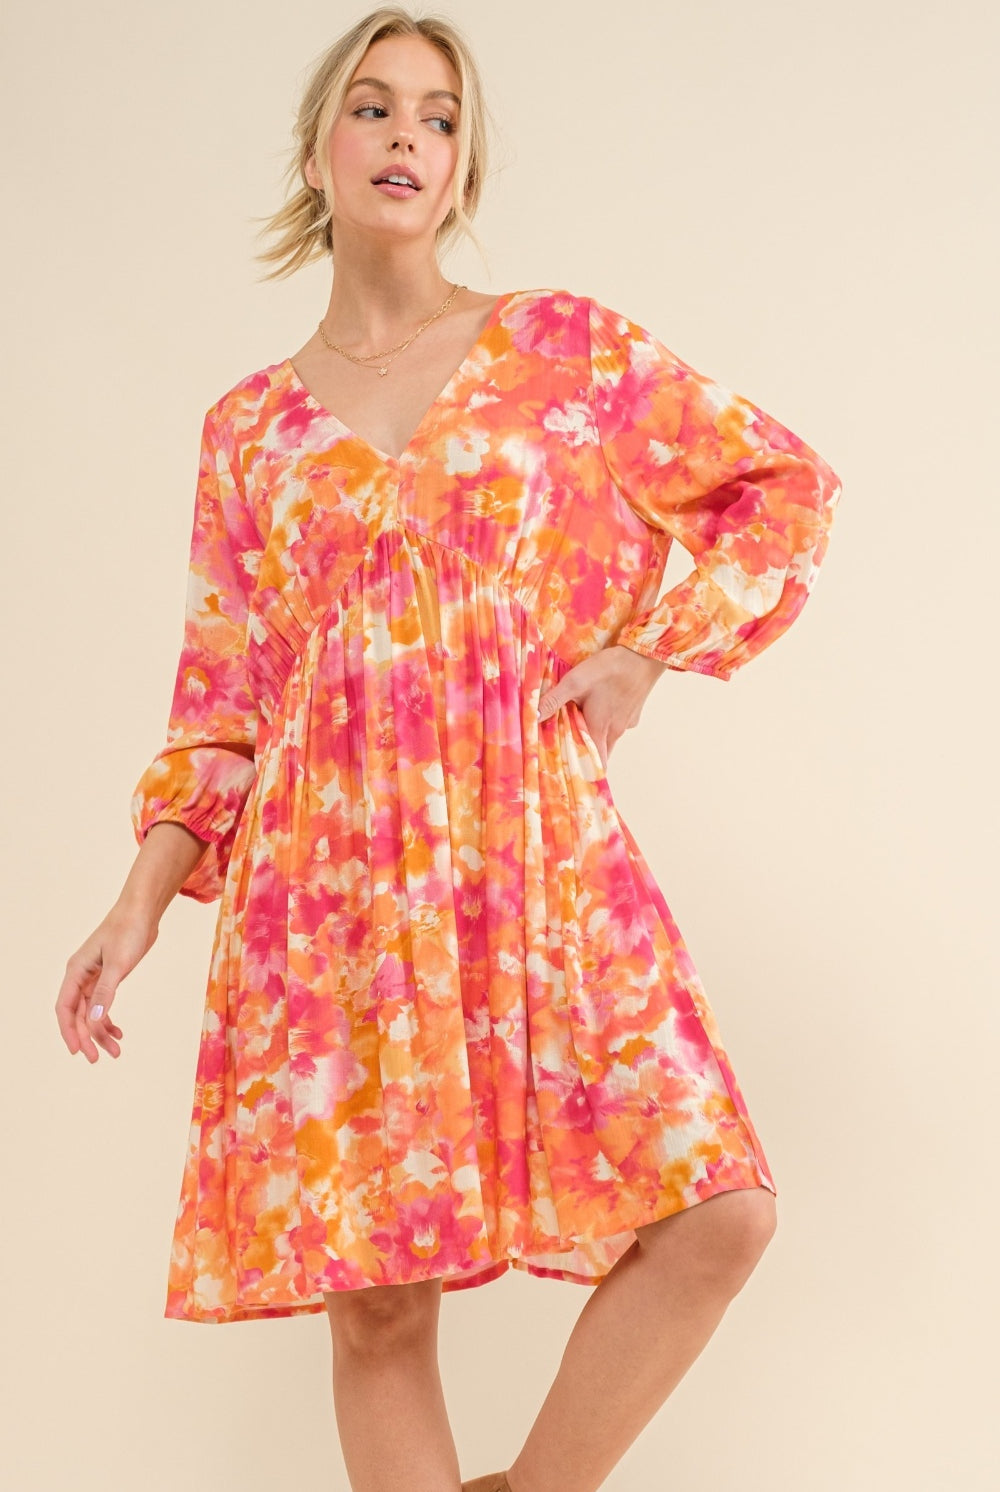 Woman wearing a vibrant floral print long sleeve dress in shades of orange and pink, featuring a tie back detail.